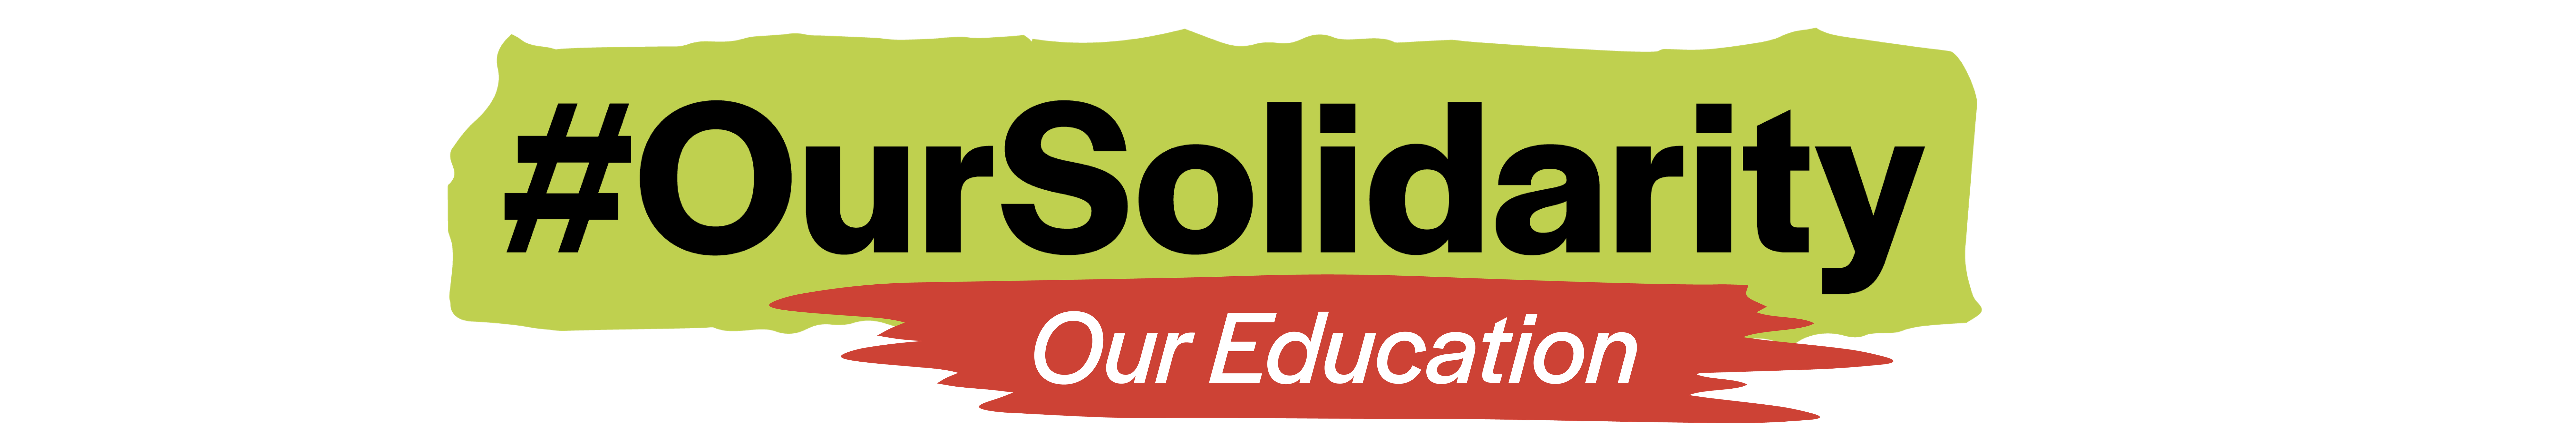 Our Education logo